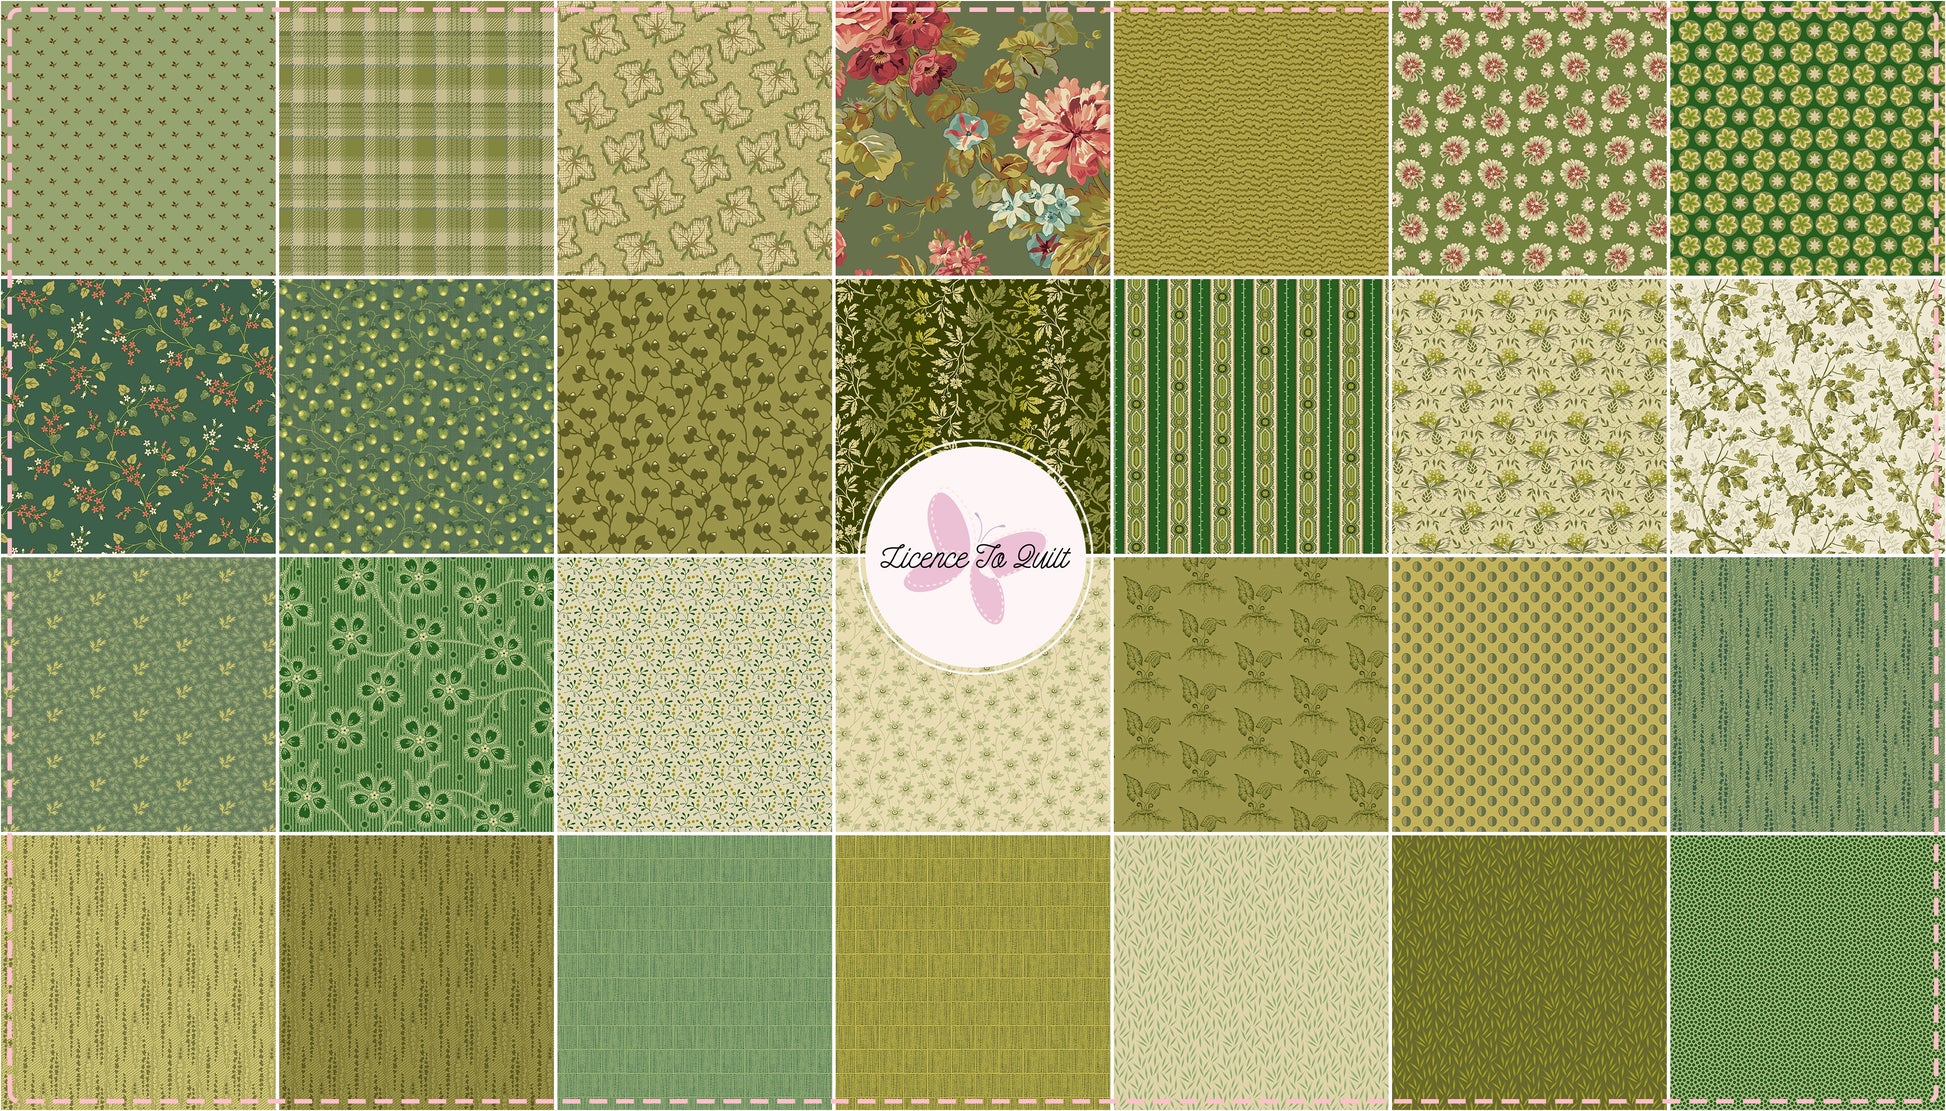 Green Thumb - Wild Rose Cassia - Licence To Quilt